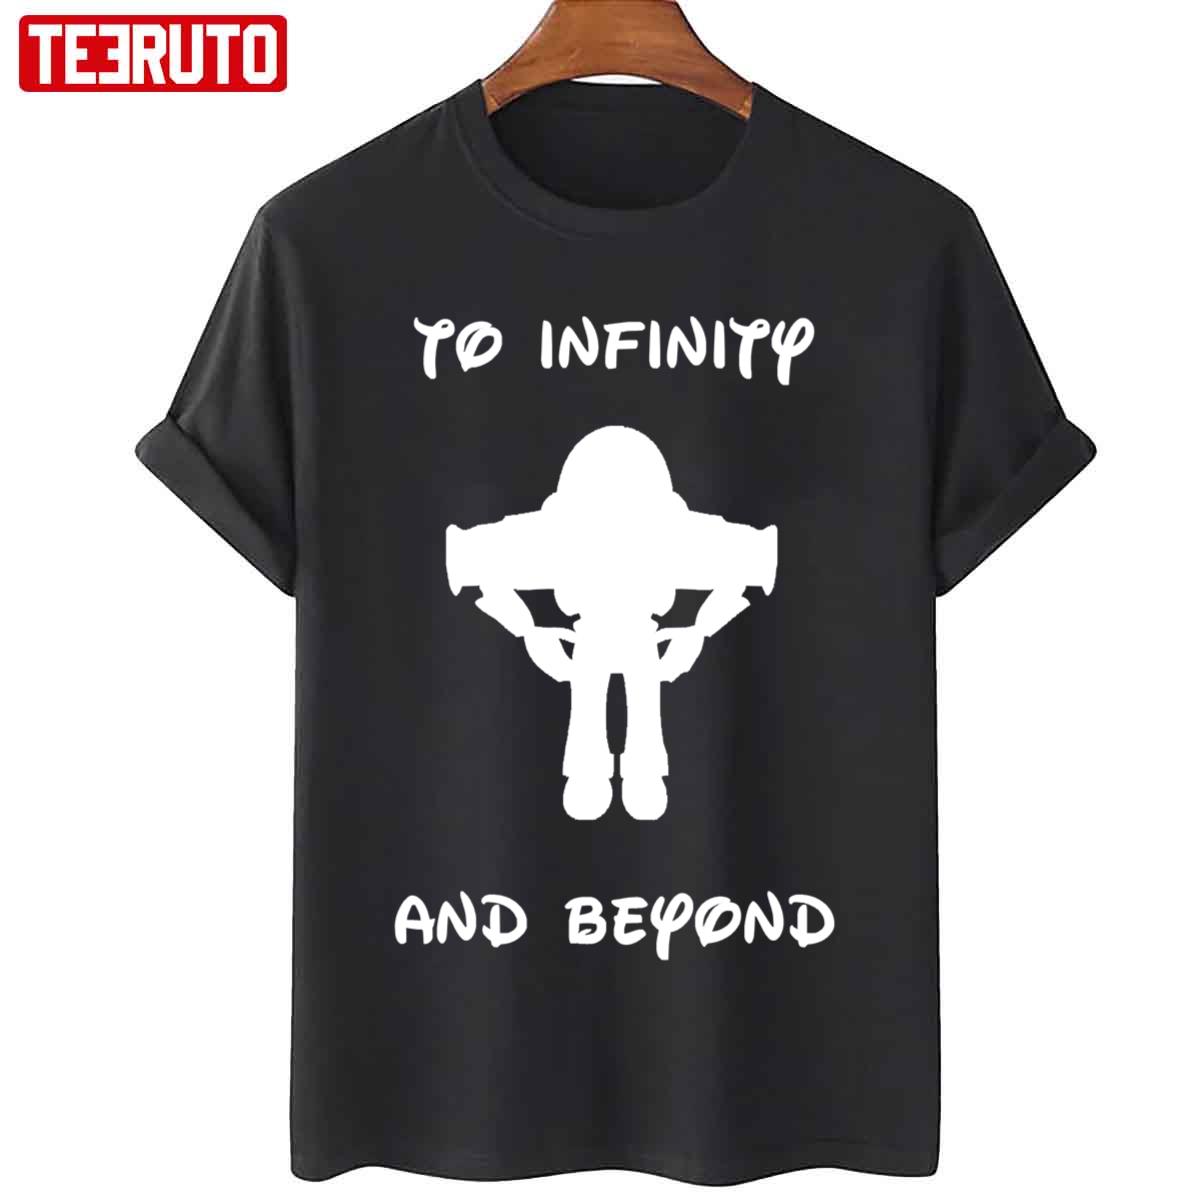 Buzz Lightyear To Infinity and Beyond Unisex T-Shirt